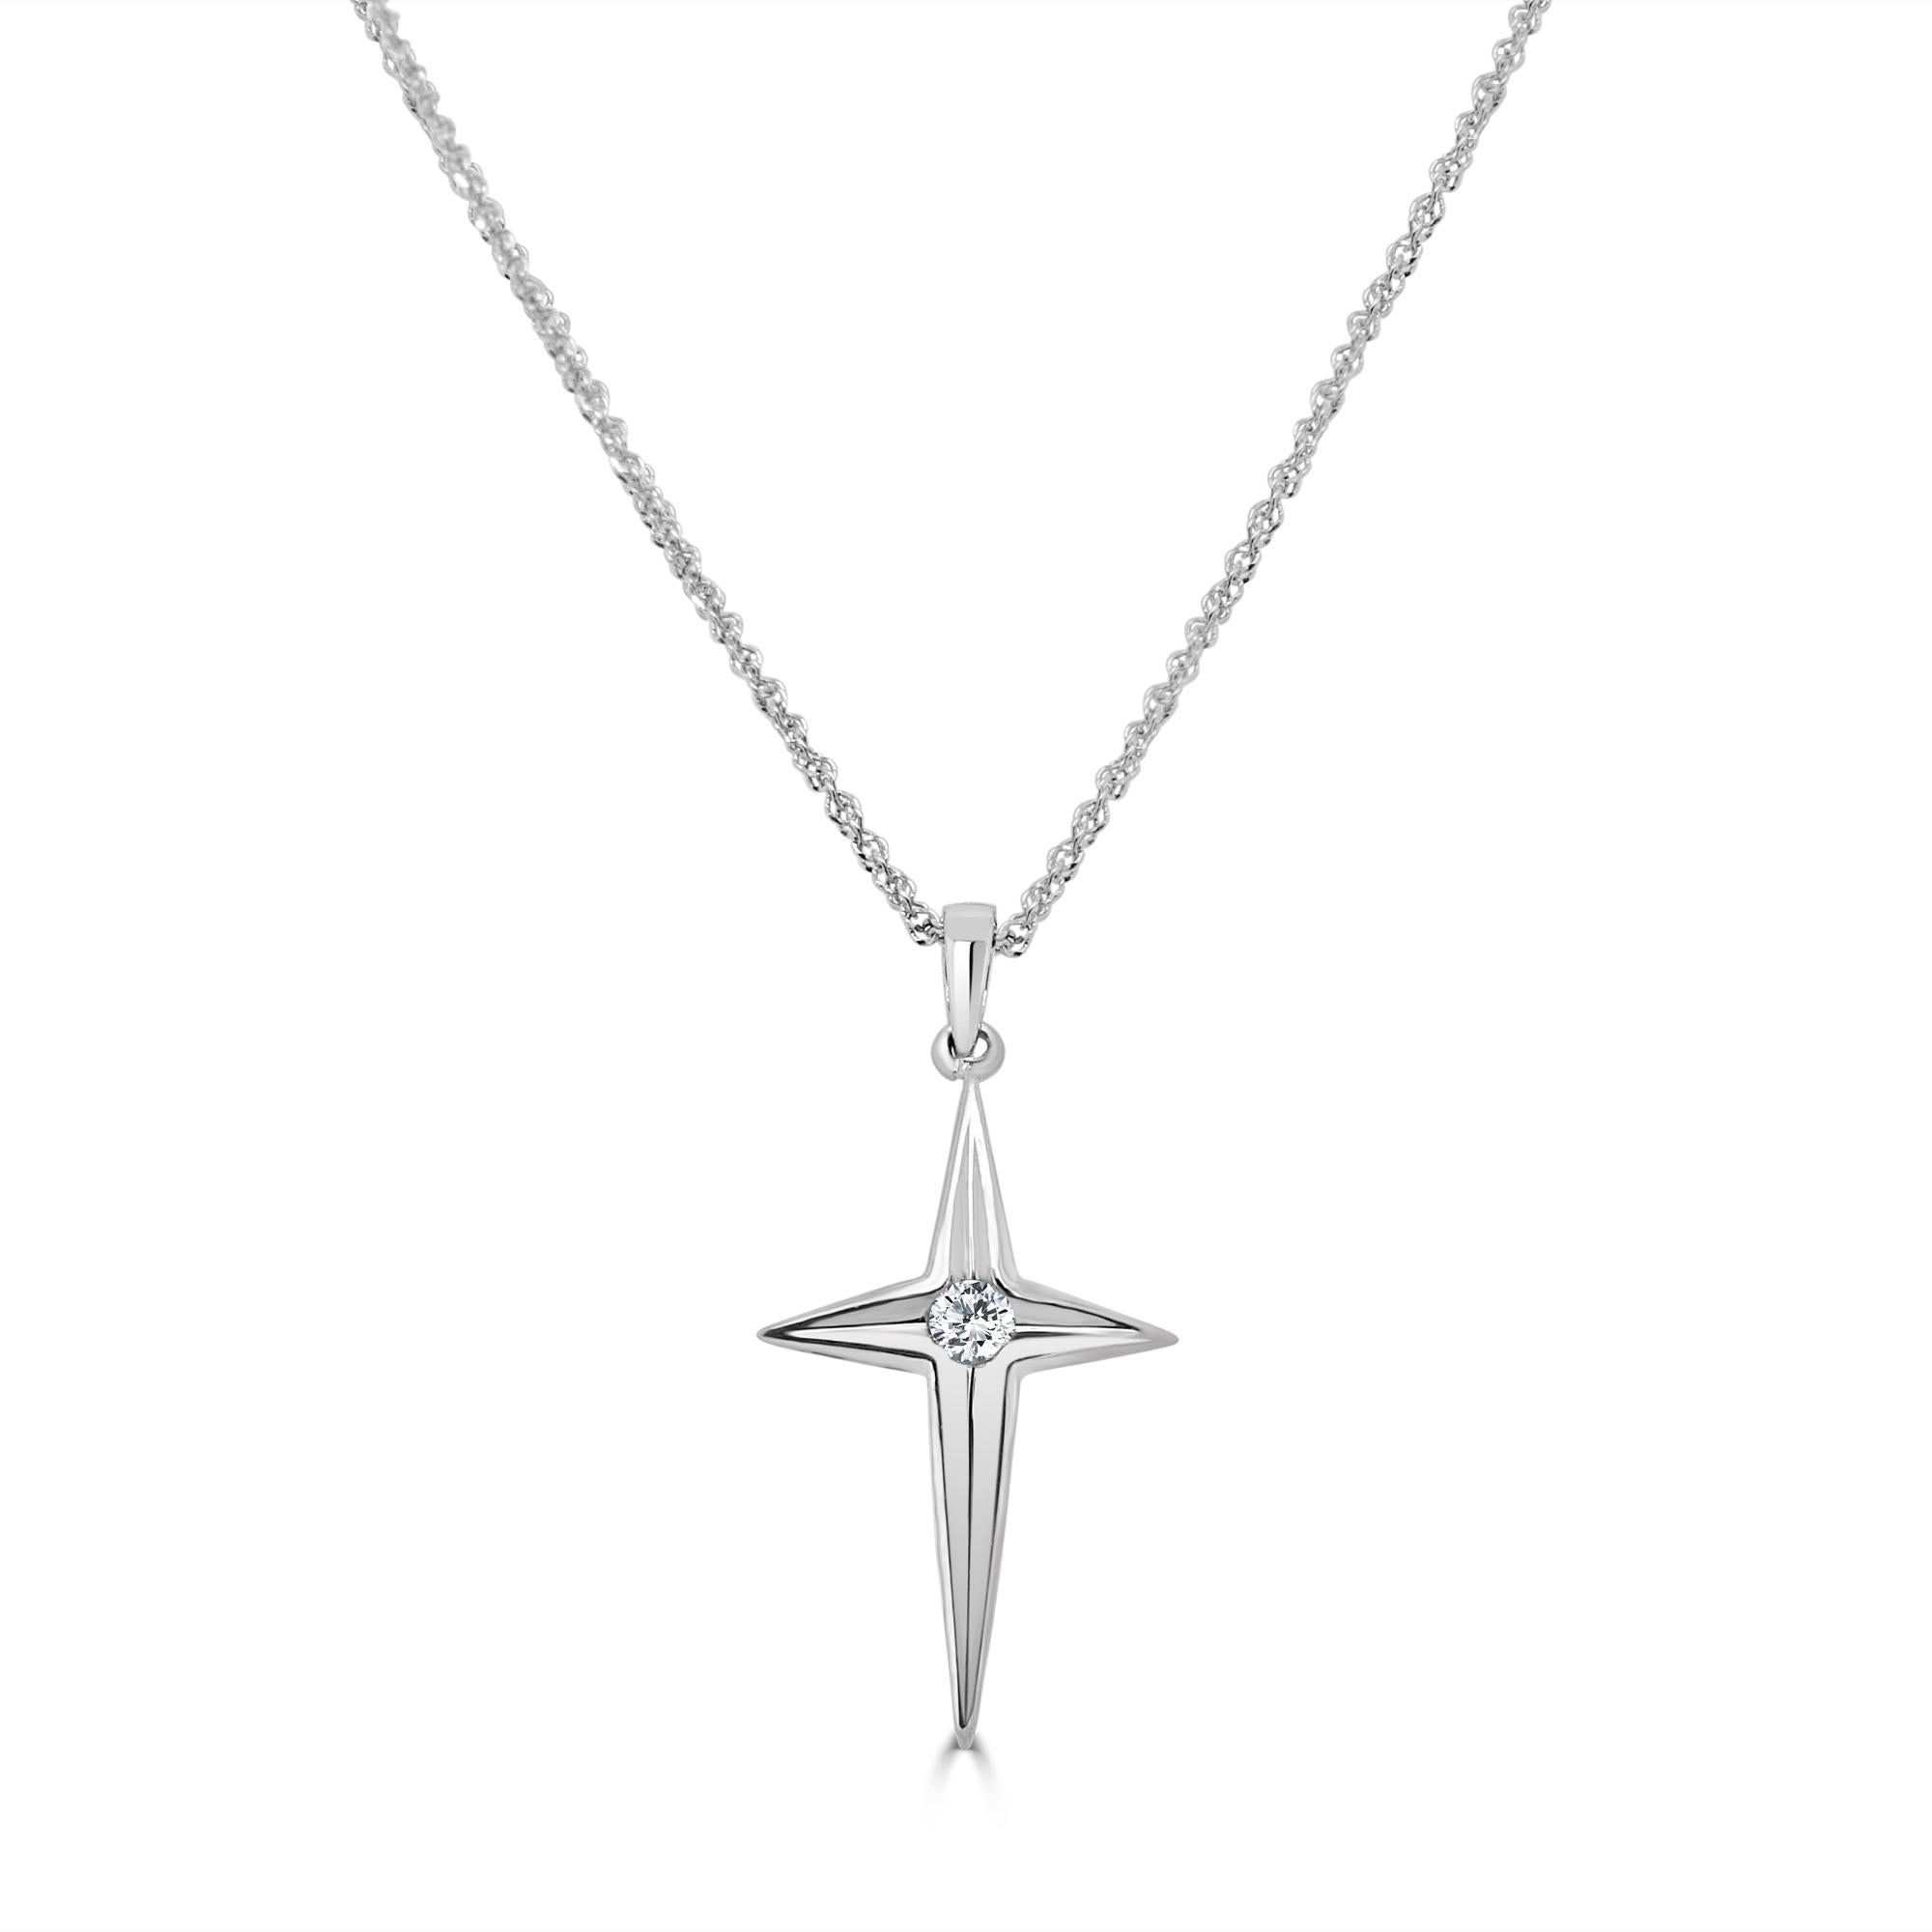 Display your commitment to your Christian faith with this exclusive 18K White Gold 0.06 ct Diamond Cross Pendant Necklace. Suspending along a barely-there 16